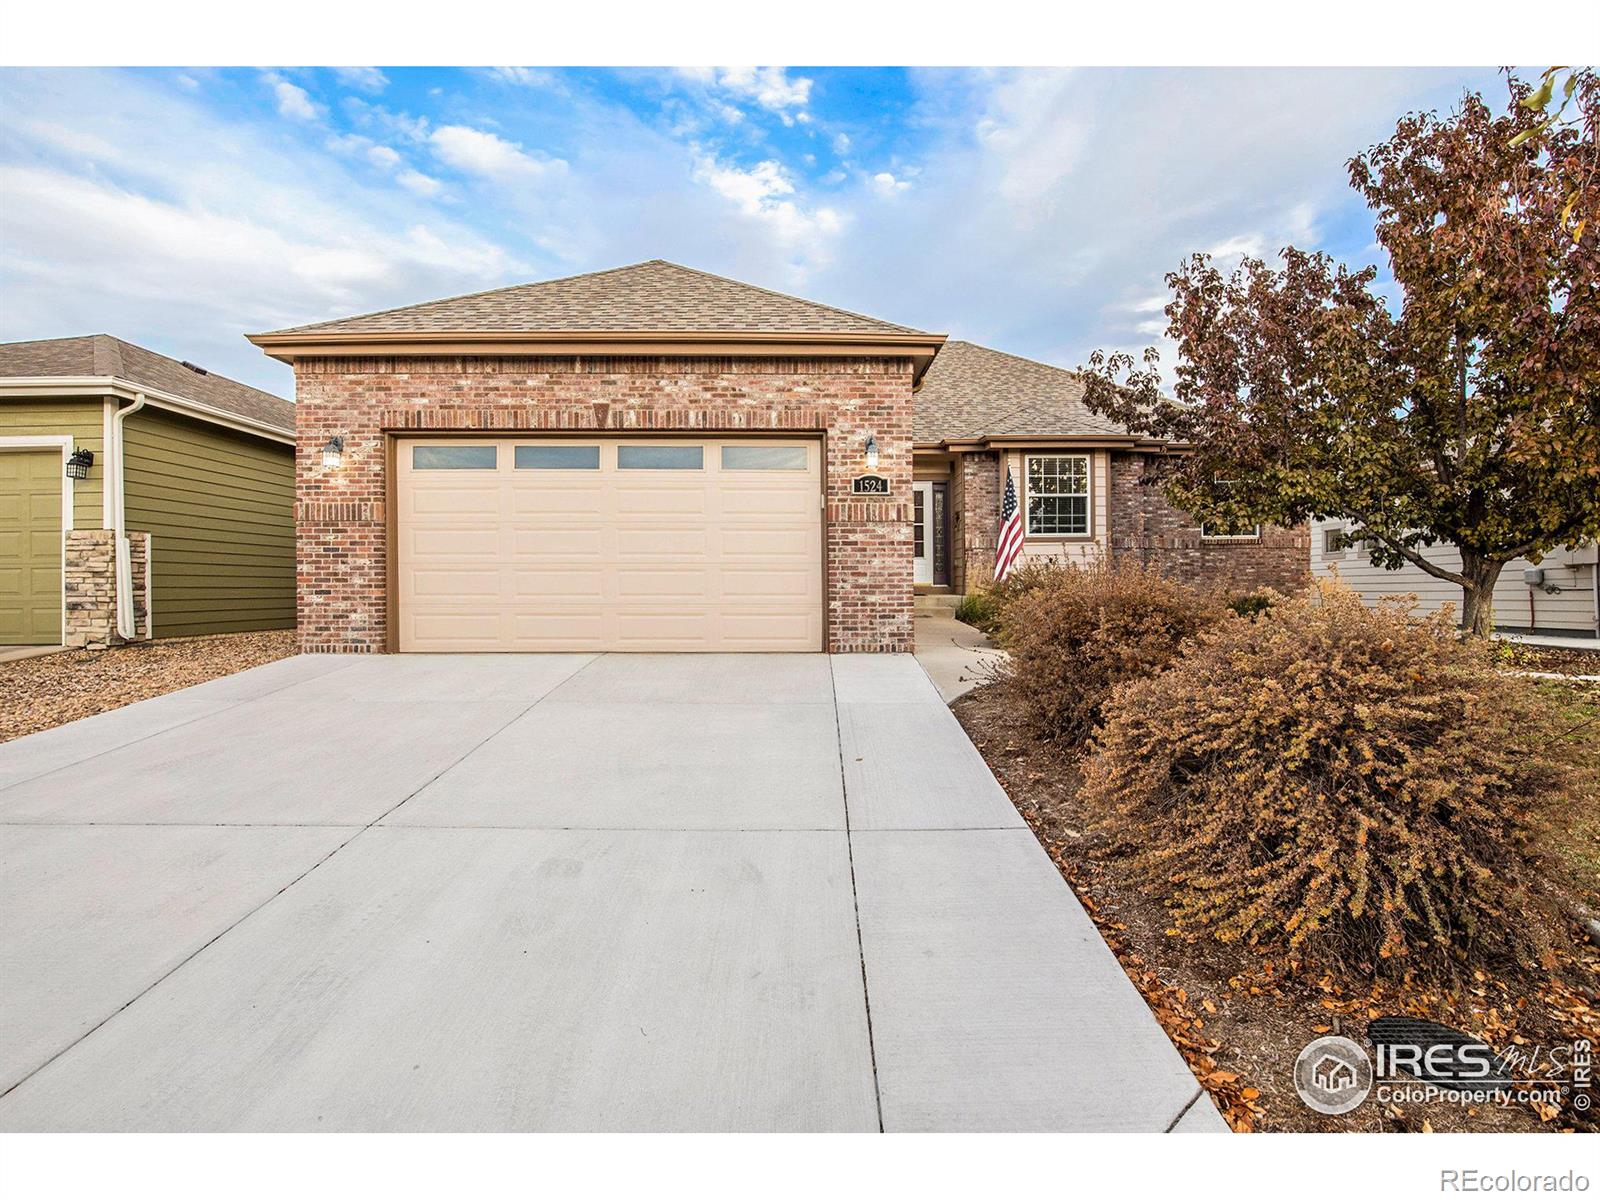 1524  61st Ave Ct, greeley MLS: 456789999407 Beds: 4 Baths: 3 Price: $540,000